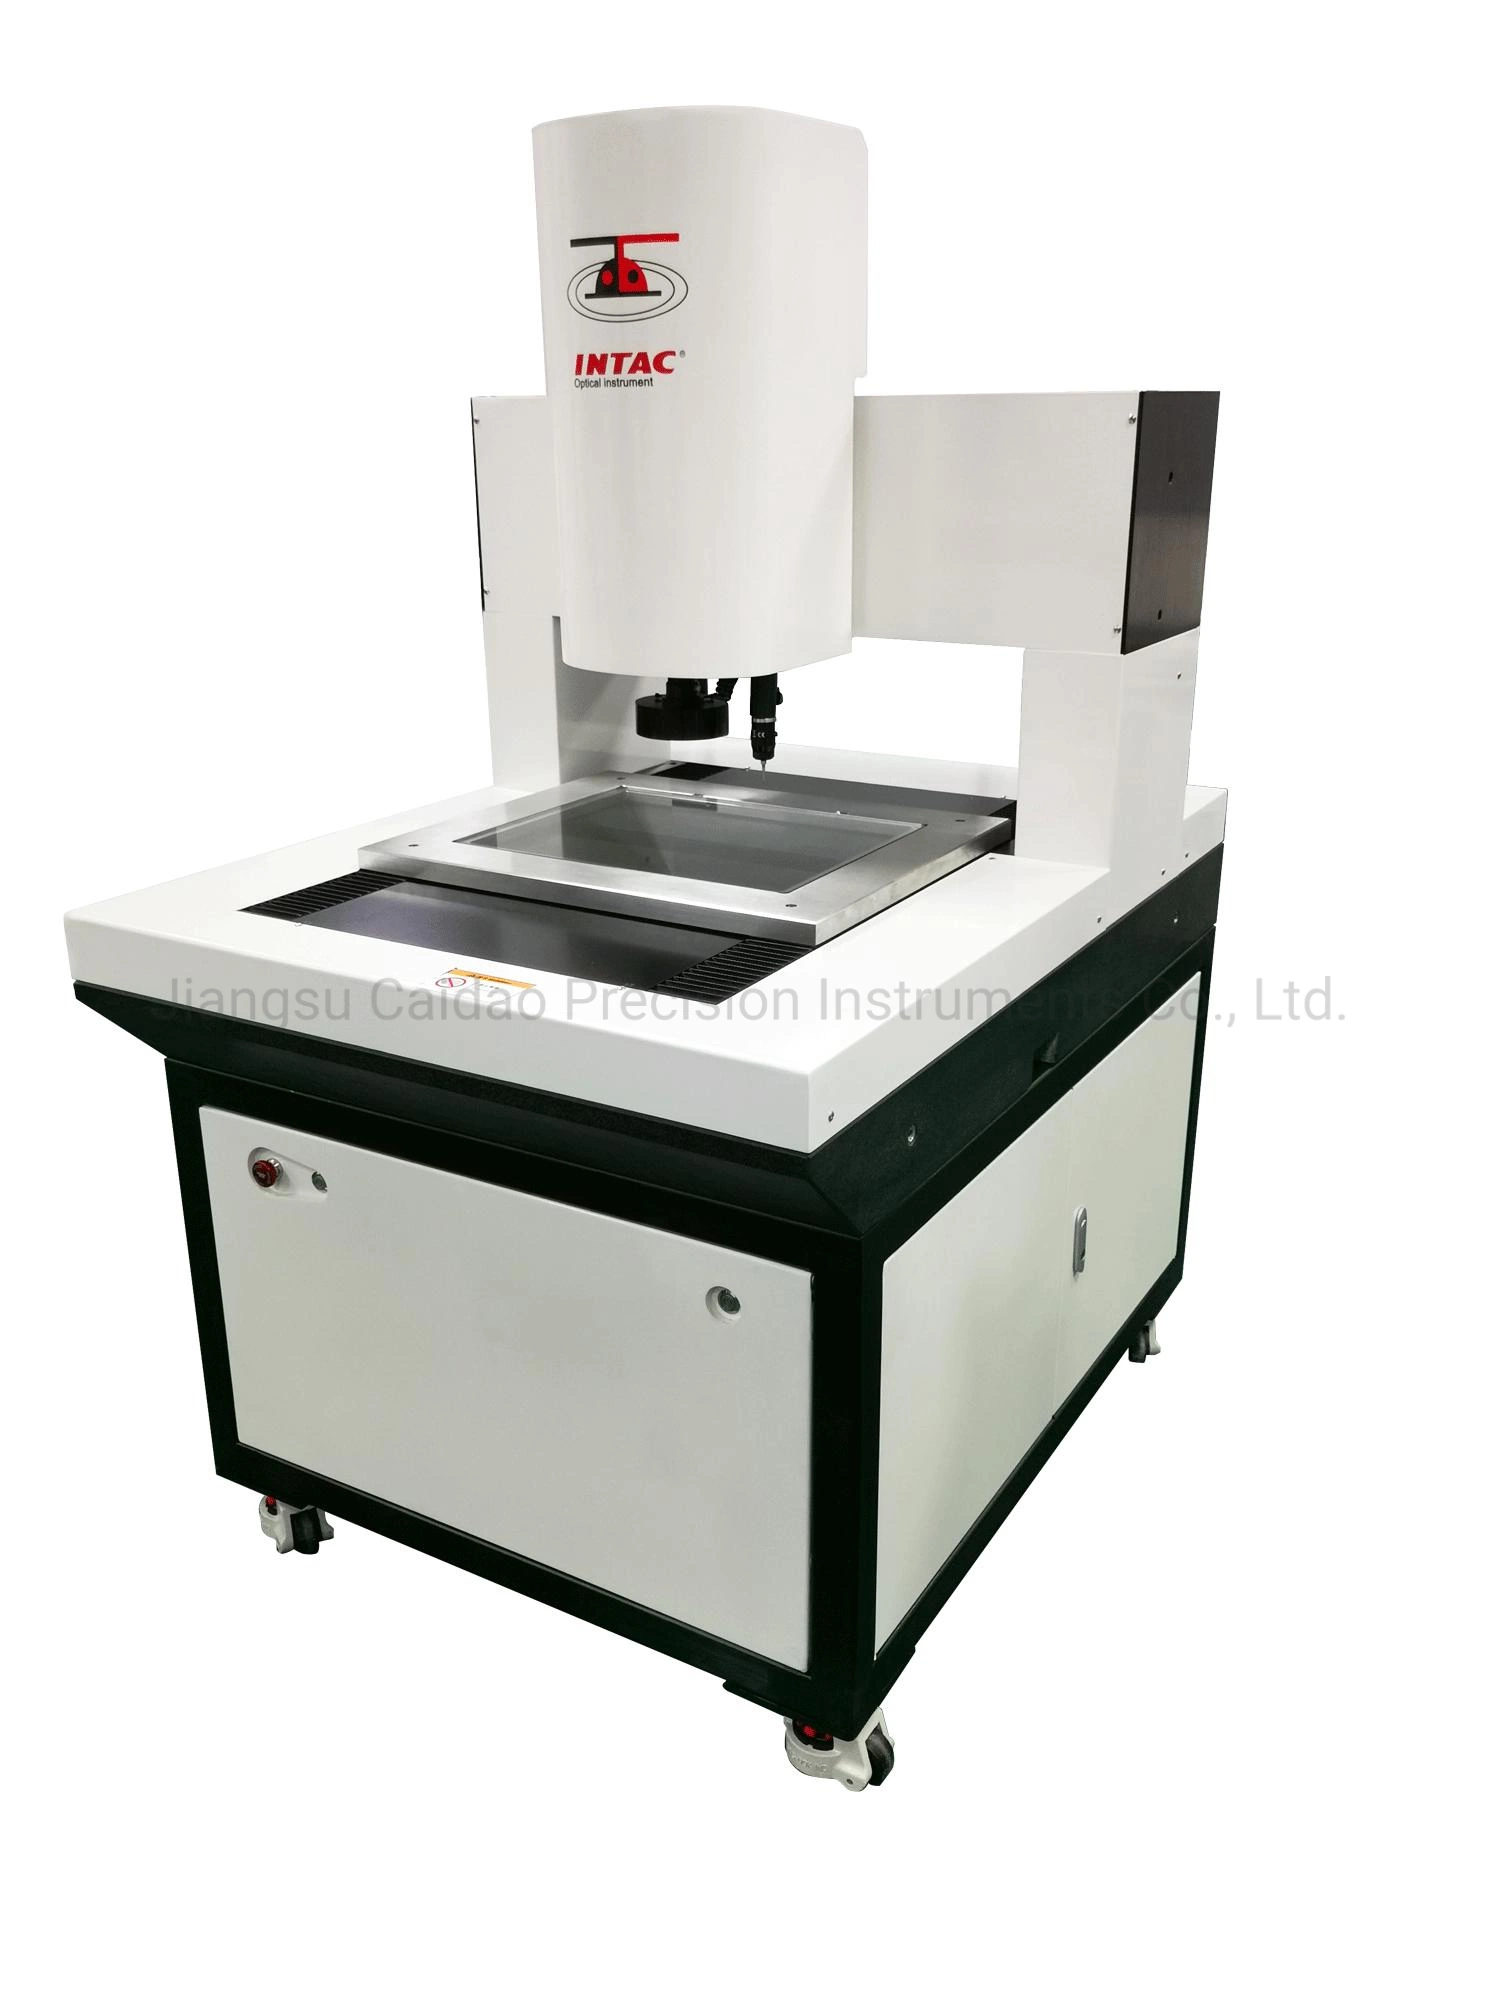 Full-Auto Vision Measuring Machine and Video Measuring System Newton 600h